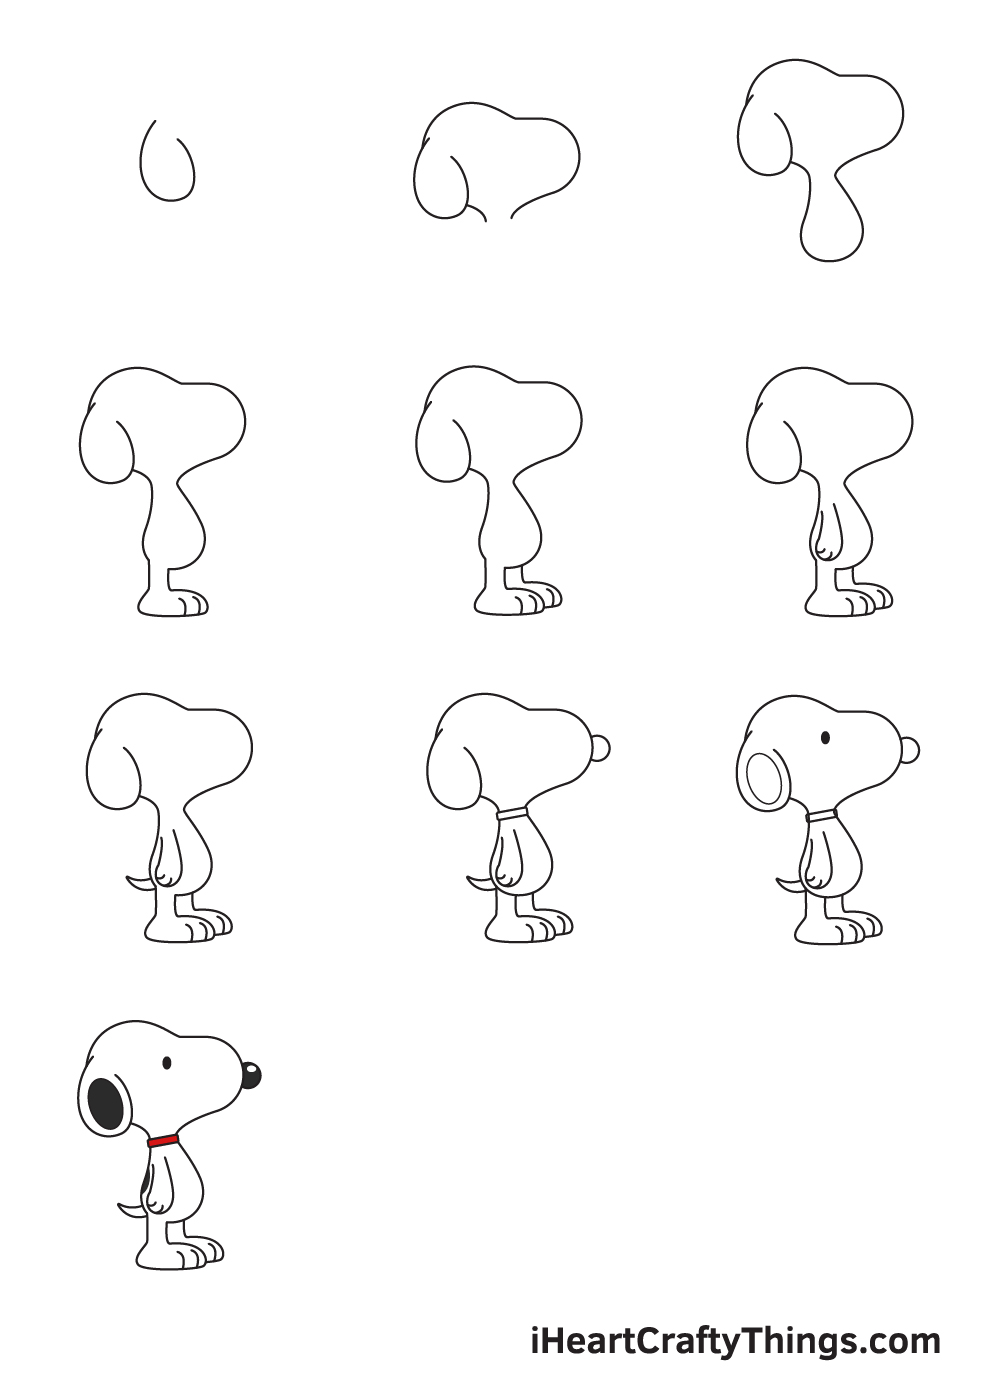 drawing snoopy in 9 easy steps